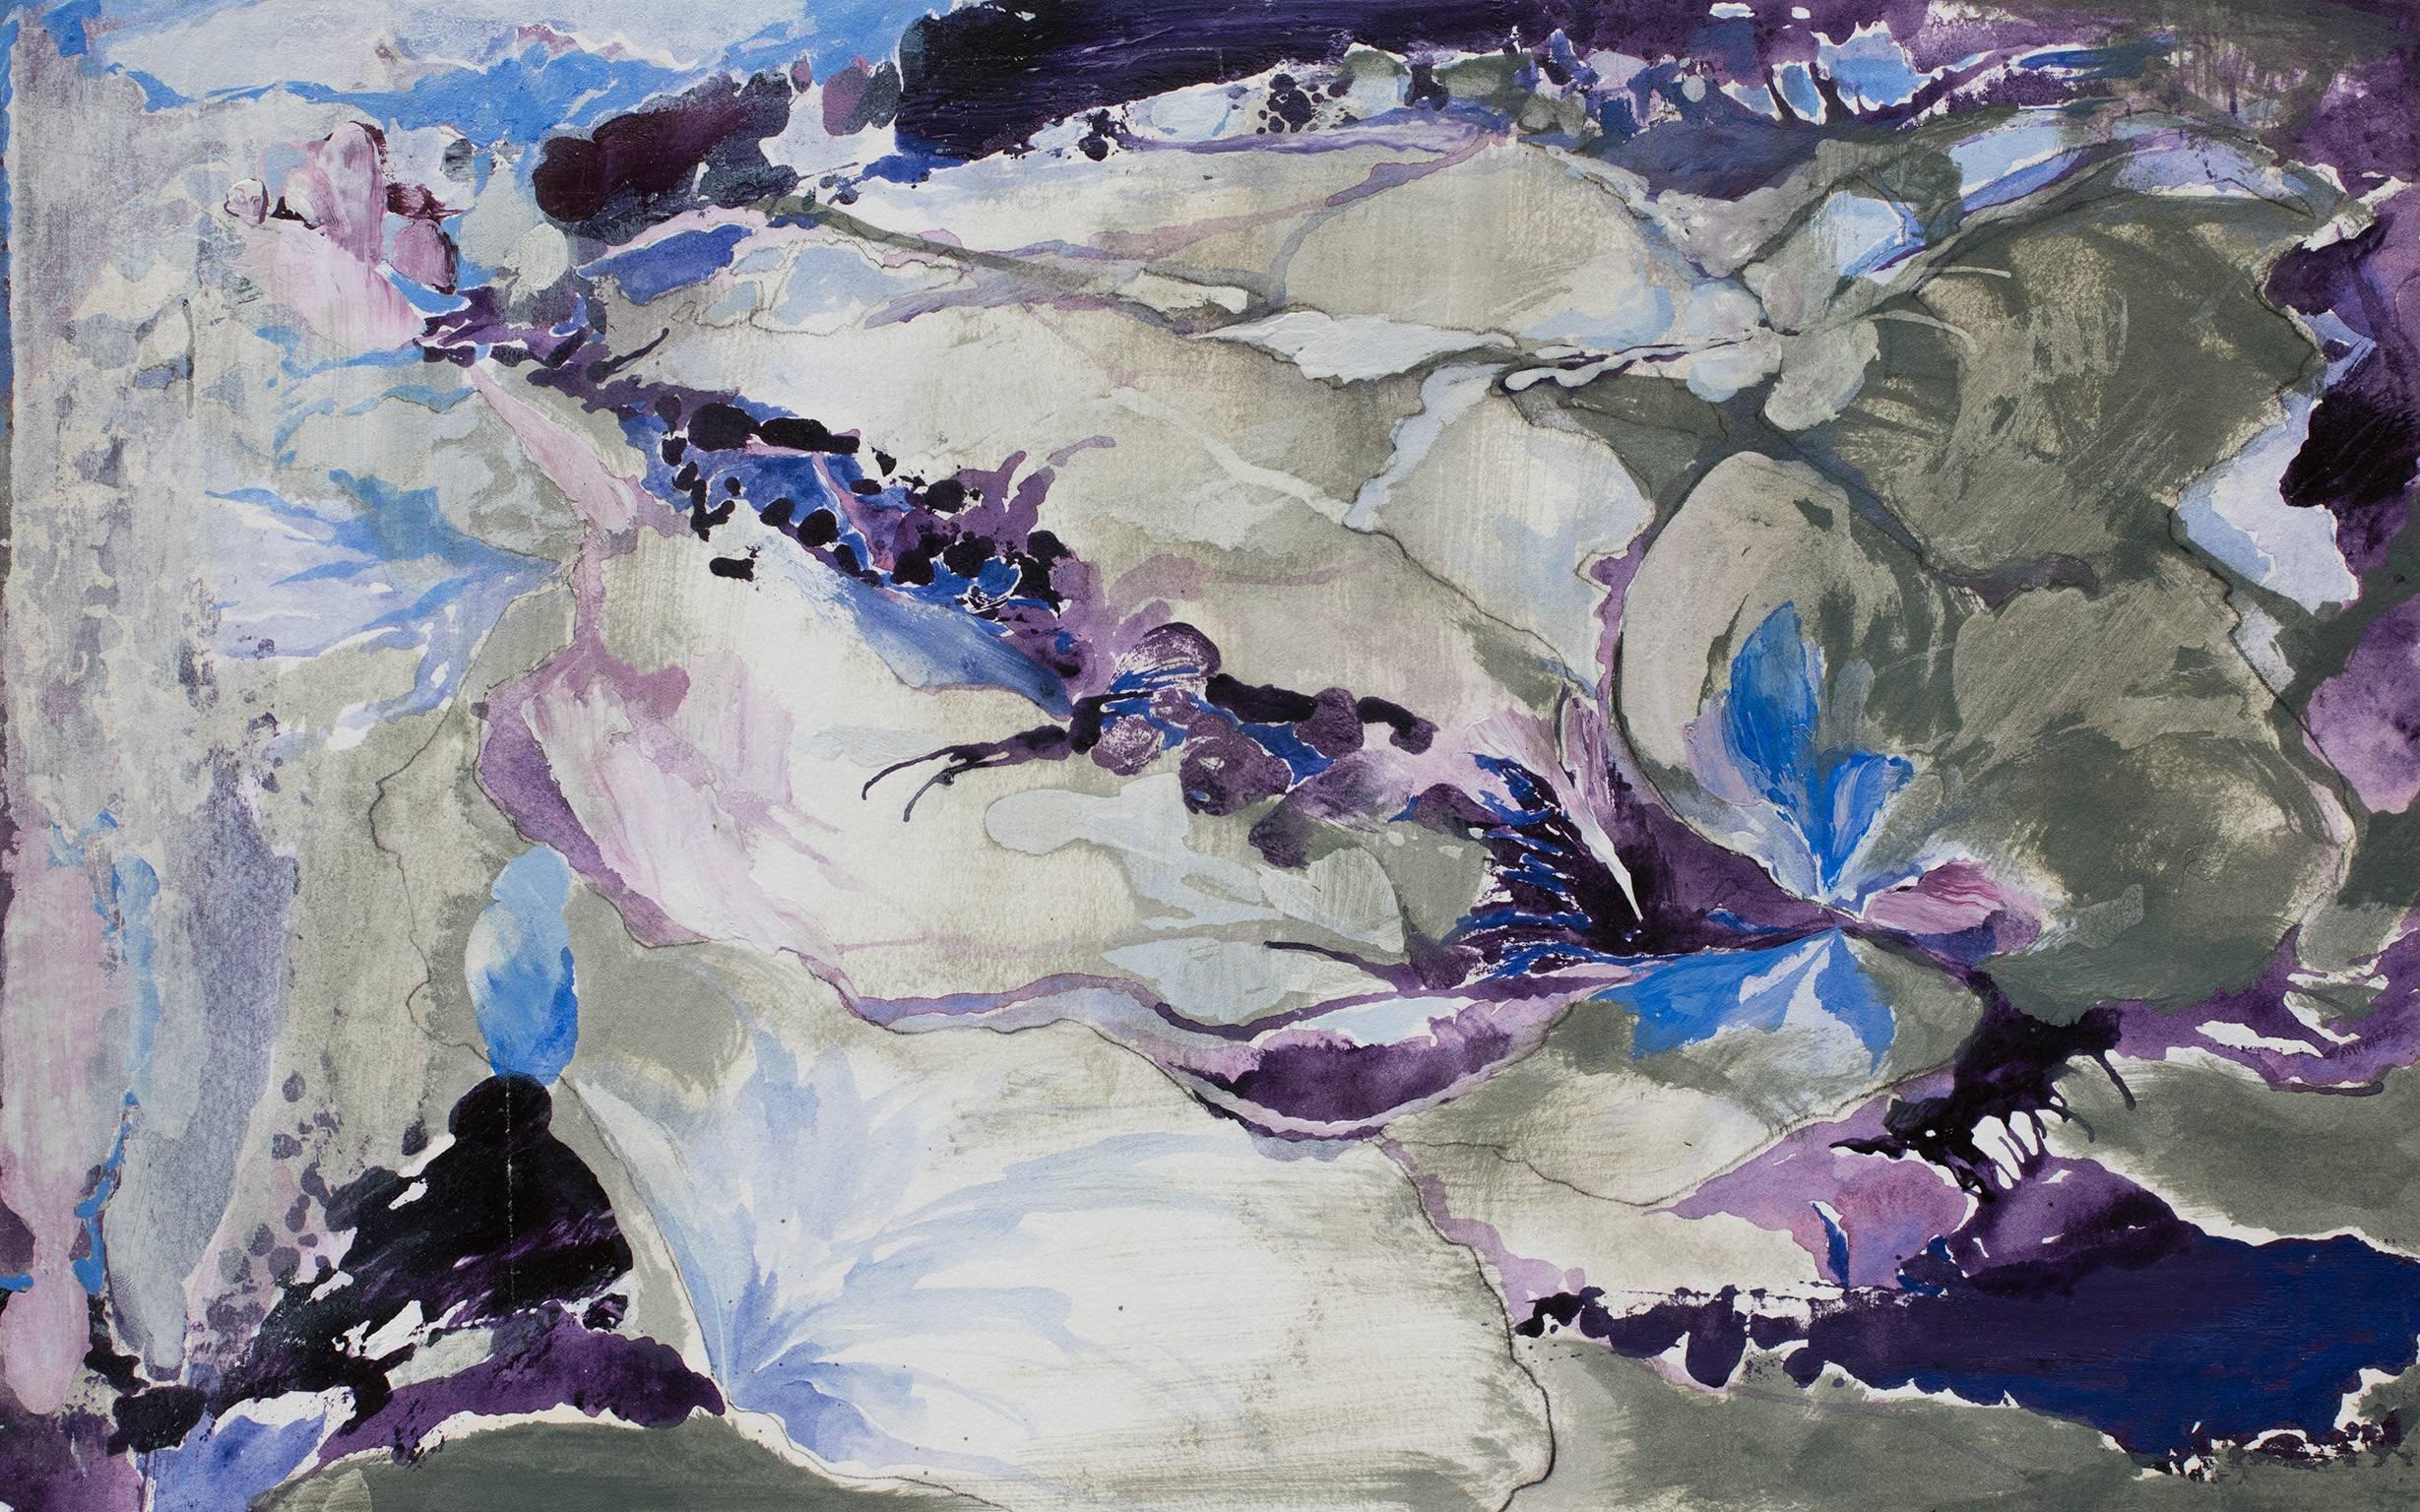 Long Way Home - Abstract Landscape on Paper in Blue and Purple Colors